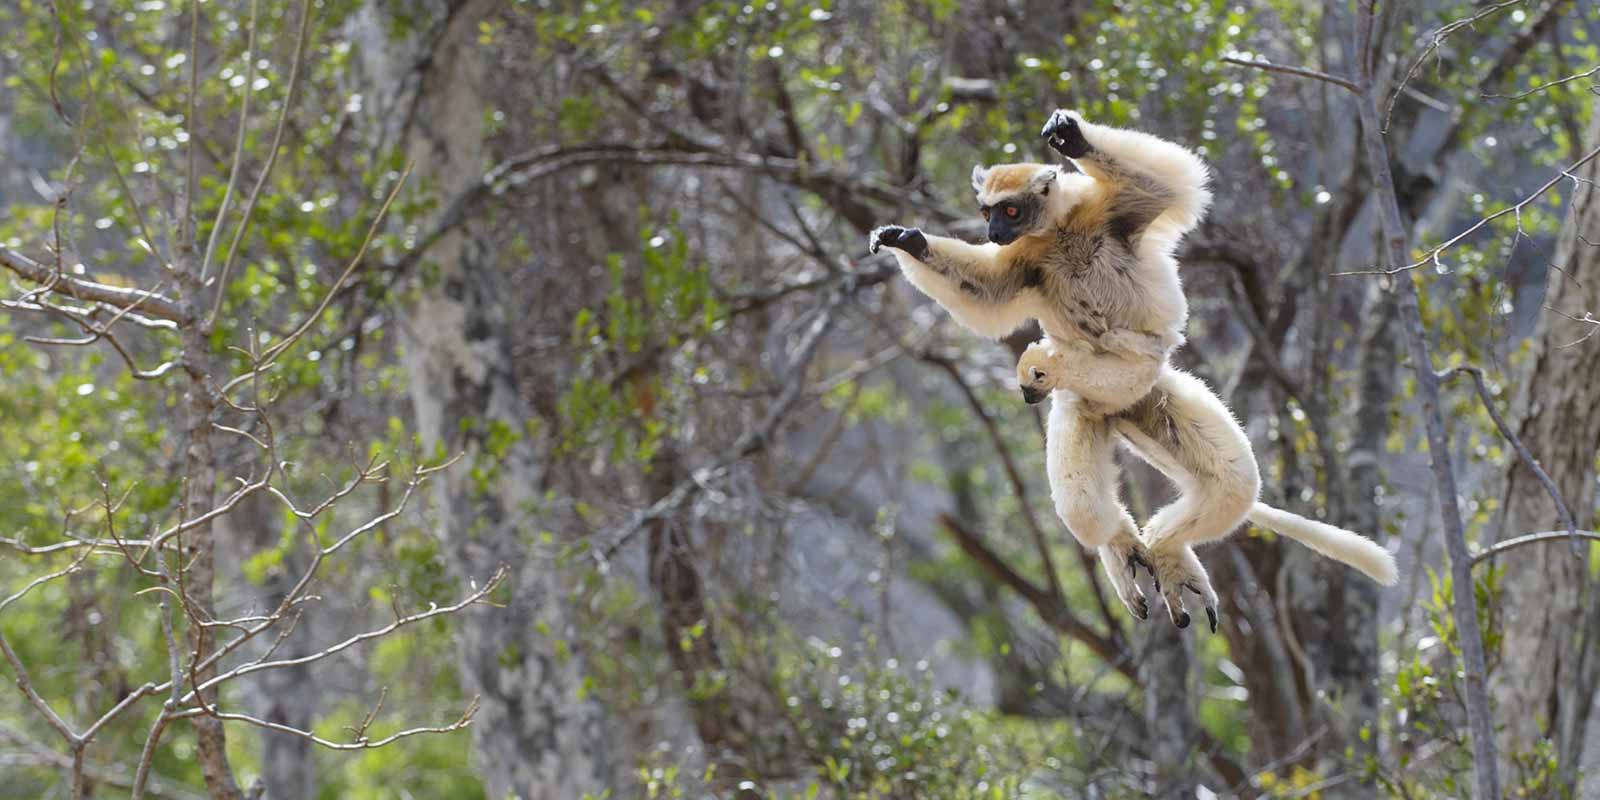 Golden crowned sifaka in Madagascar.